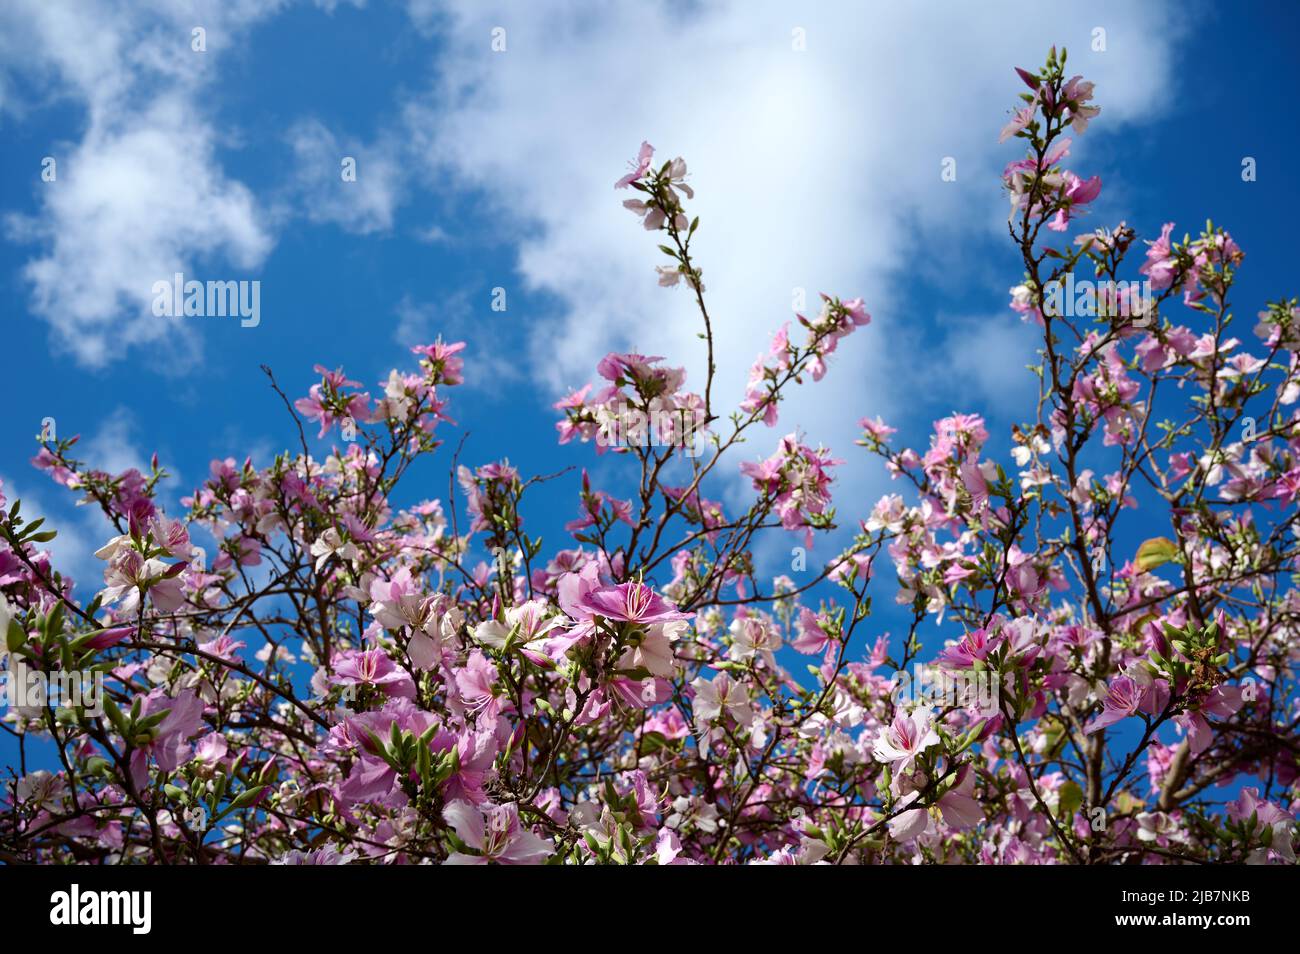 Branches of a flowering and fragrant tree Bauhinia variegata. Israel. Spring. Urban landscaping Stock Photo